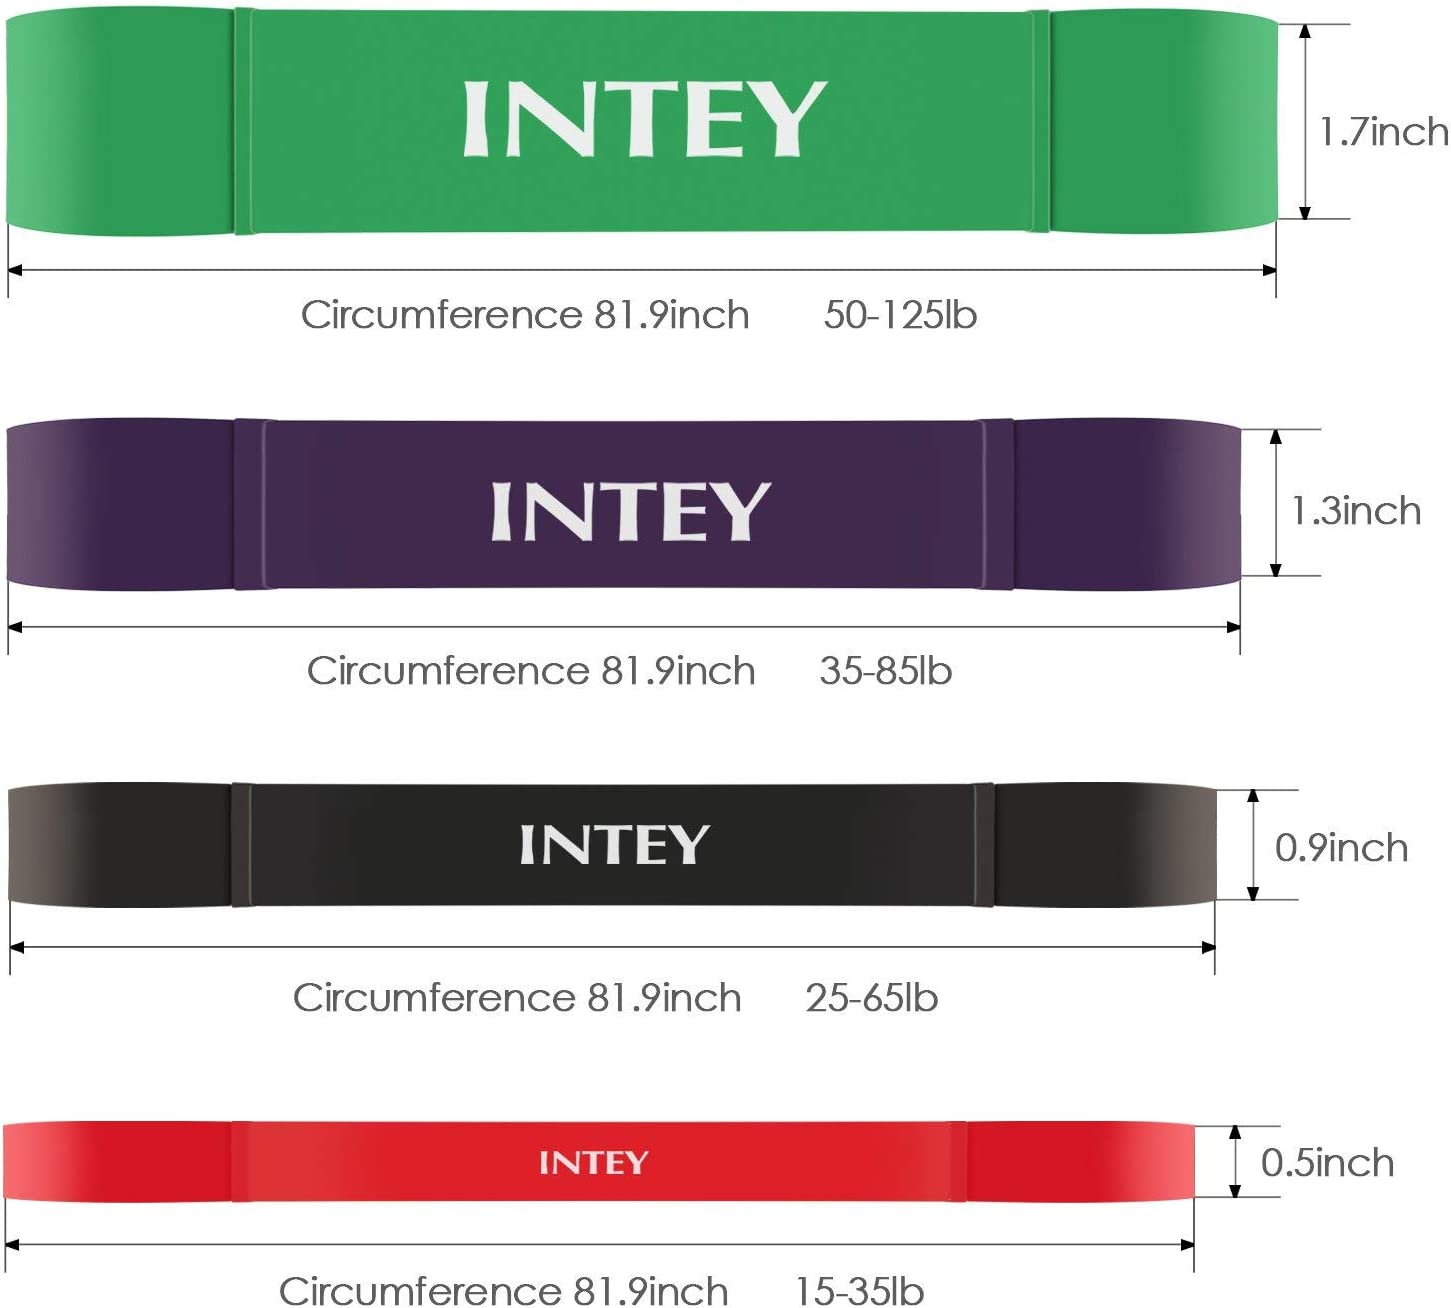 Intey resistance bands circumference and tension